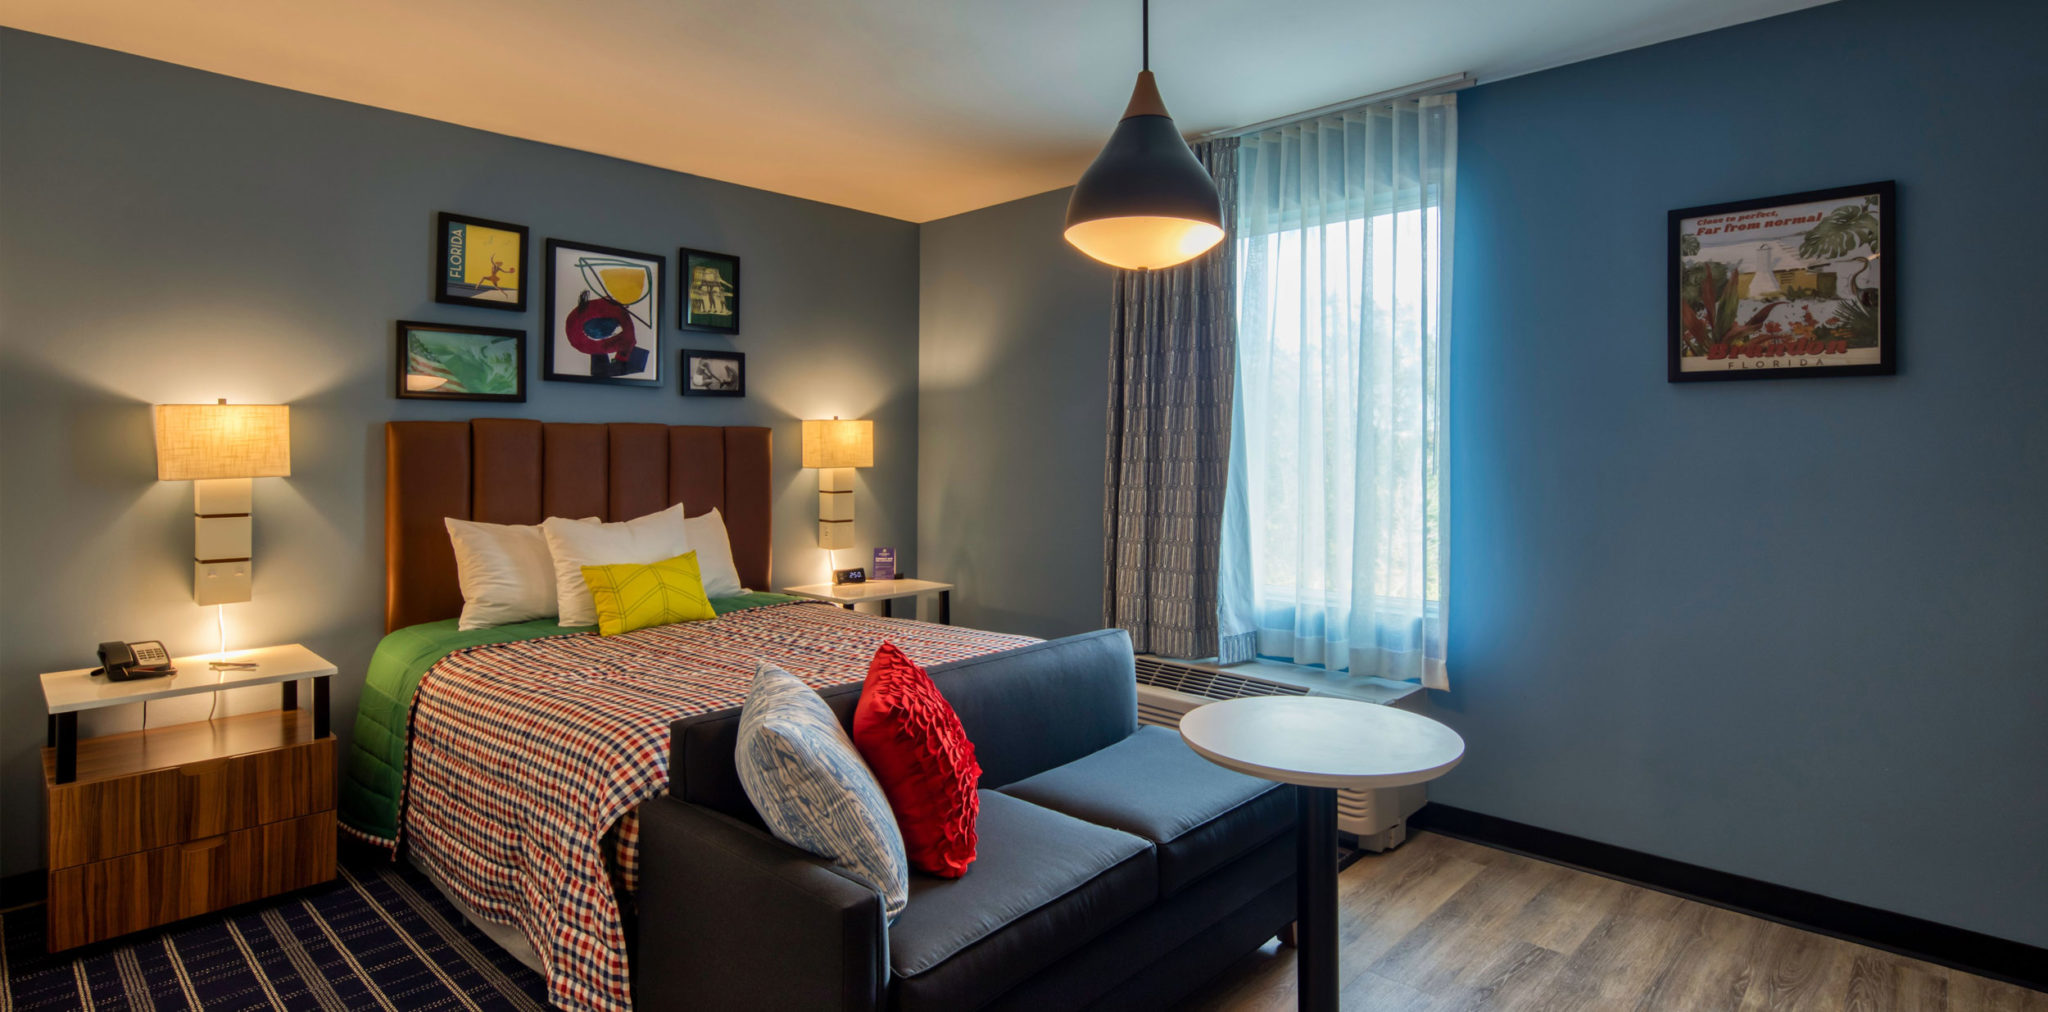 How Extended Stays Compare to Standard Hotels, Short-Term Rentals & Corporate Housing